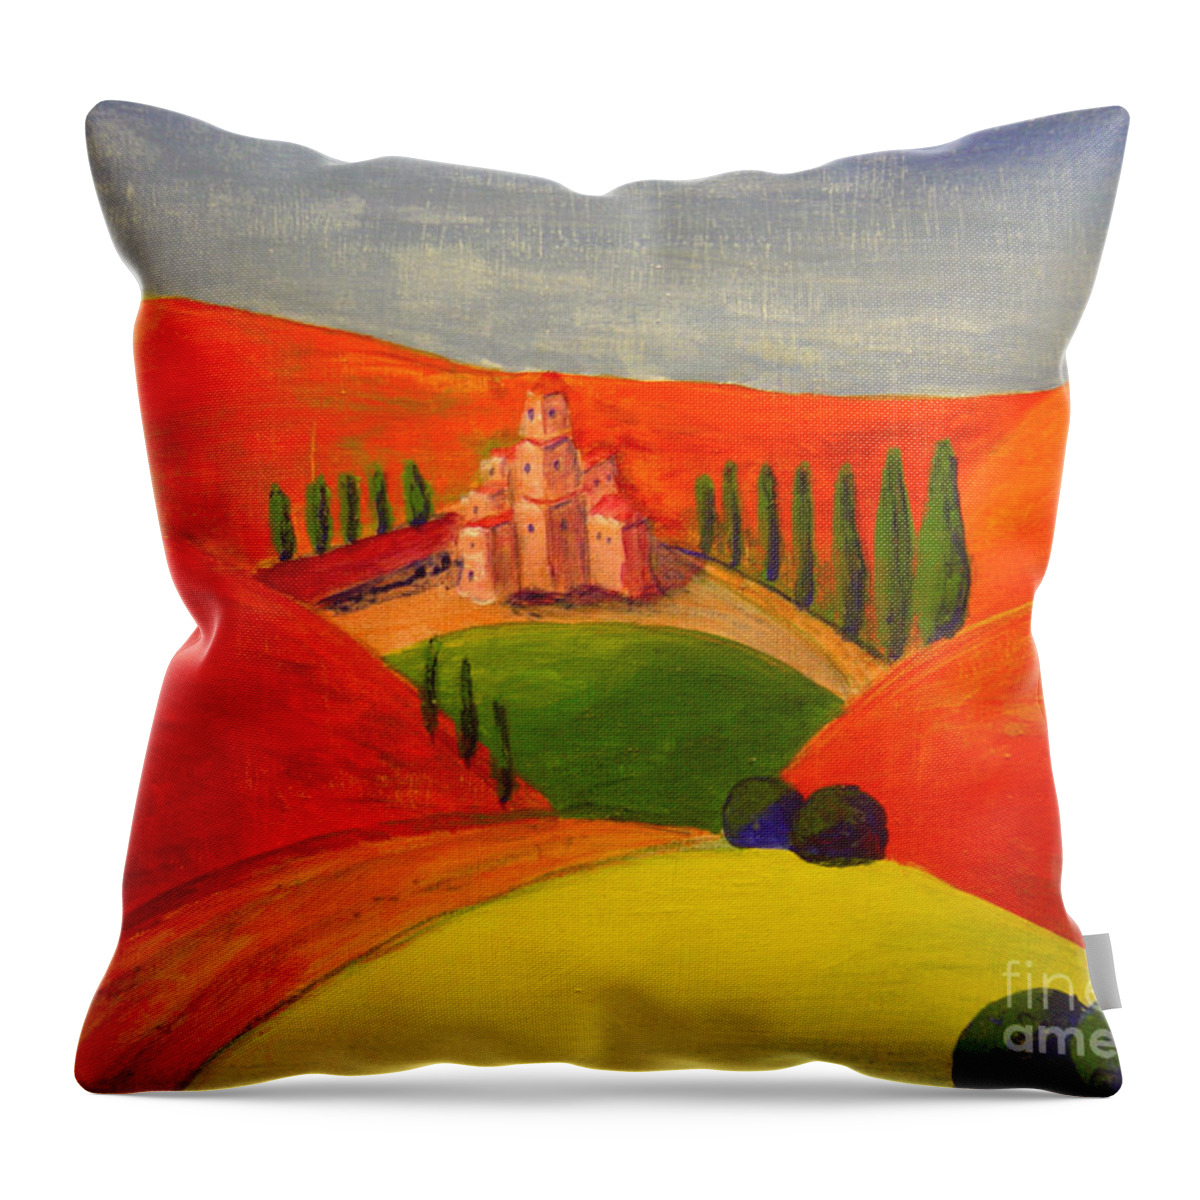 Landscape Throw Pillow featuring the painting Courtyard by Lilibeth Andre